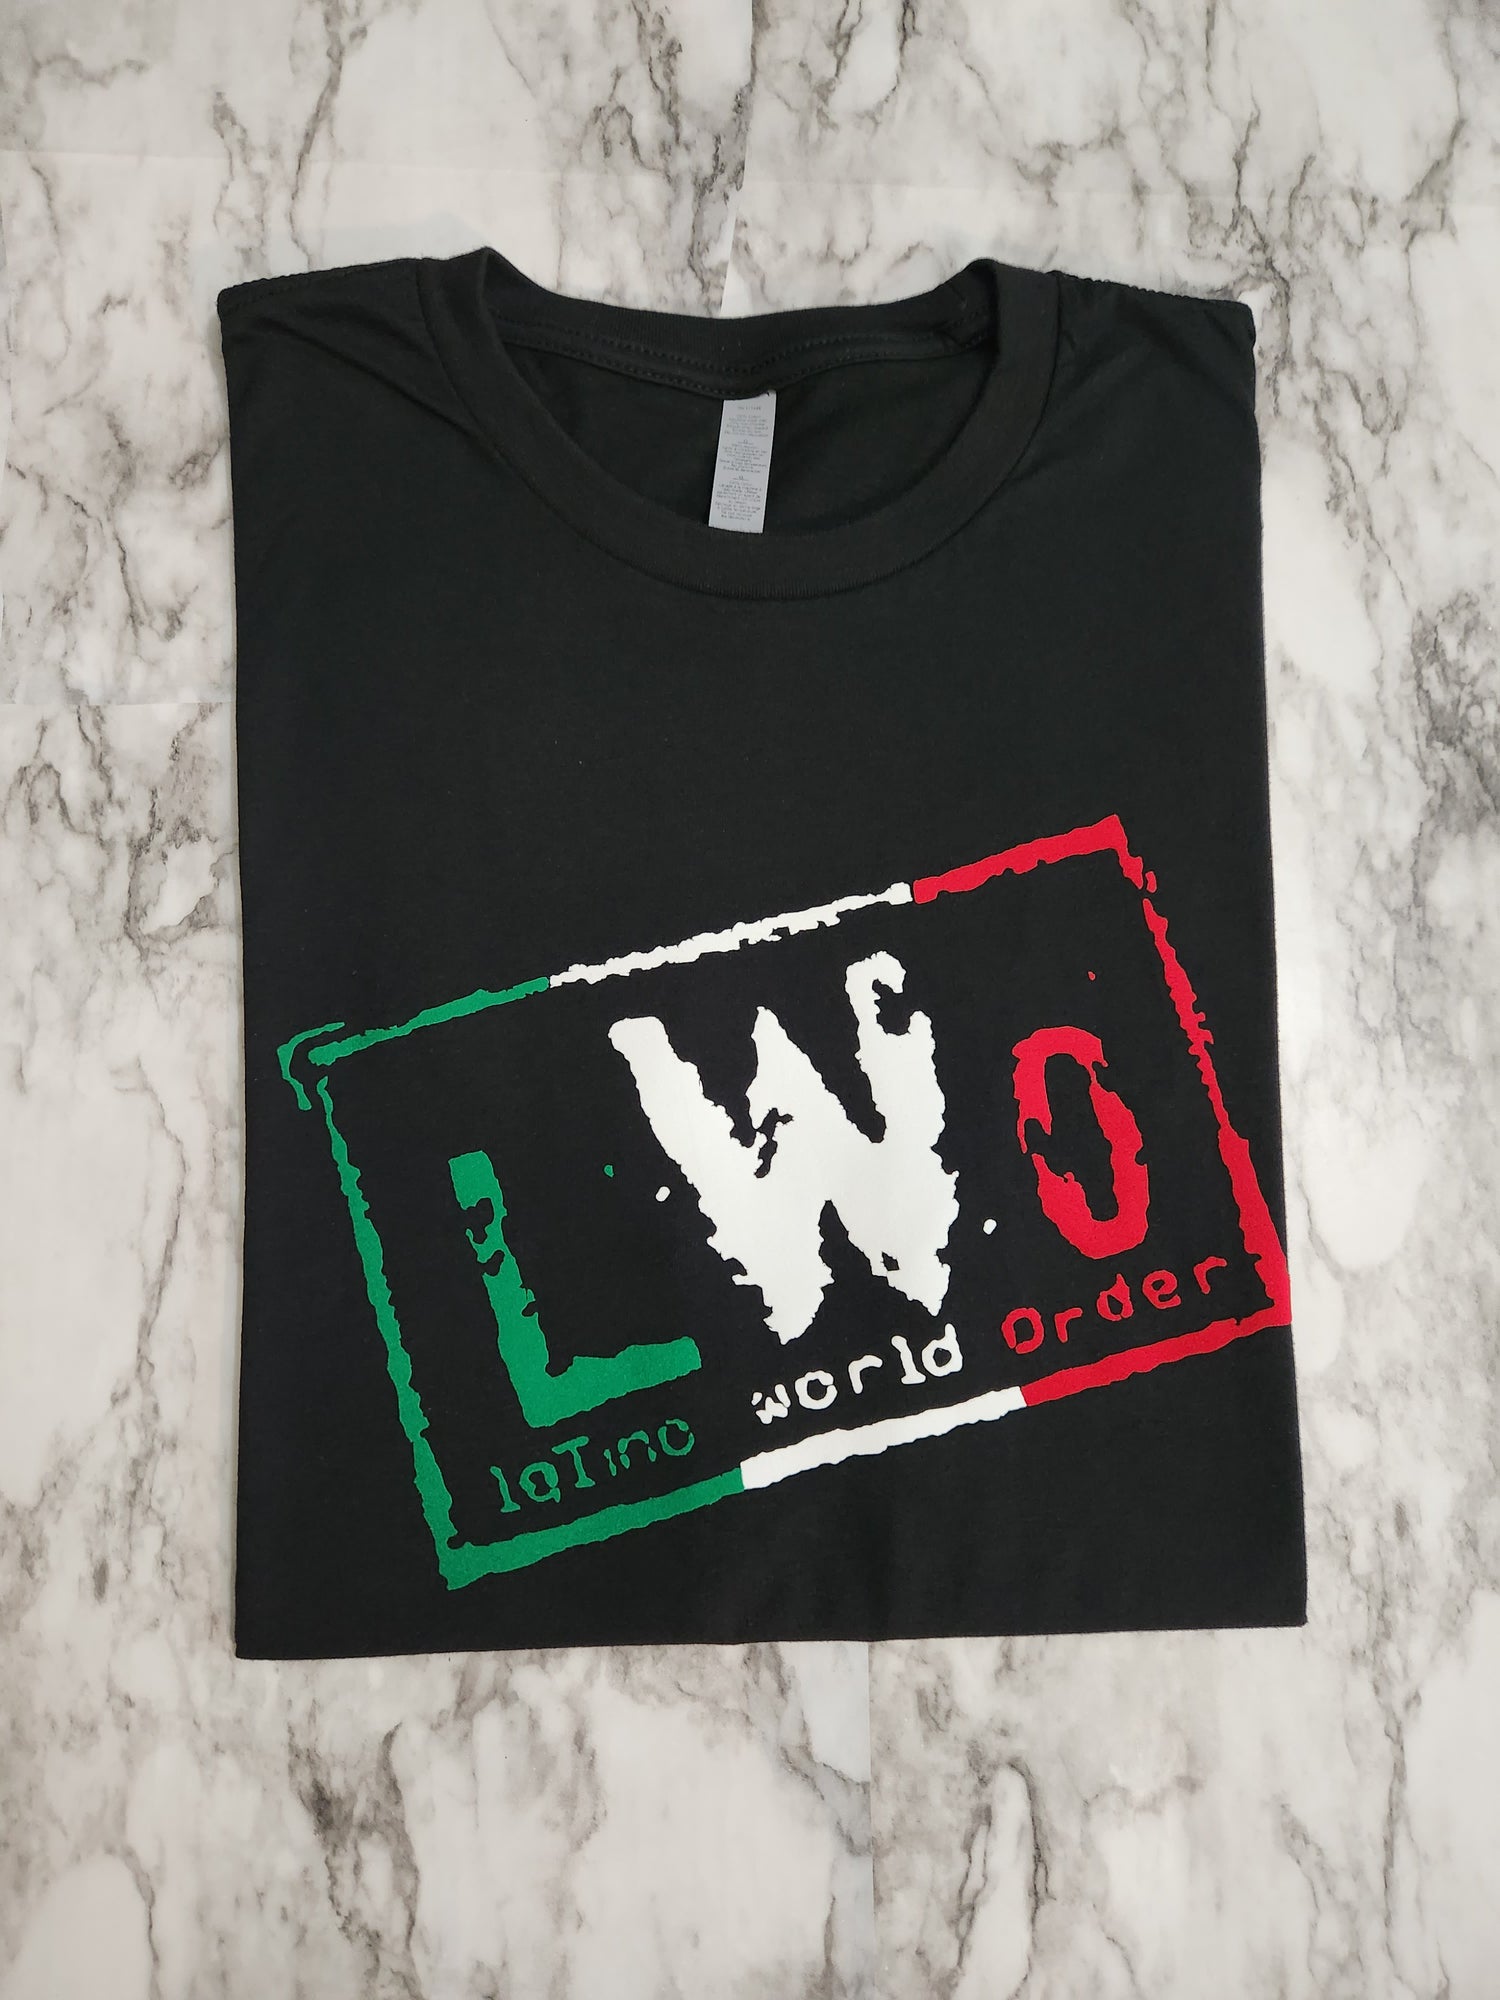 LWO T-Shirt - Centre Ave Clothing Co.